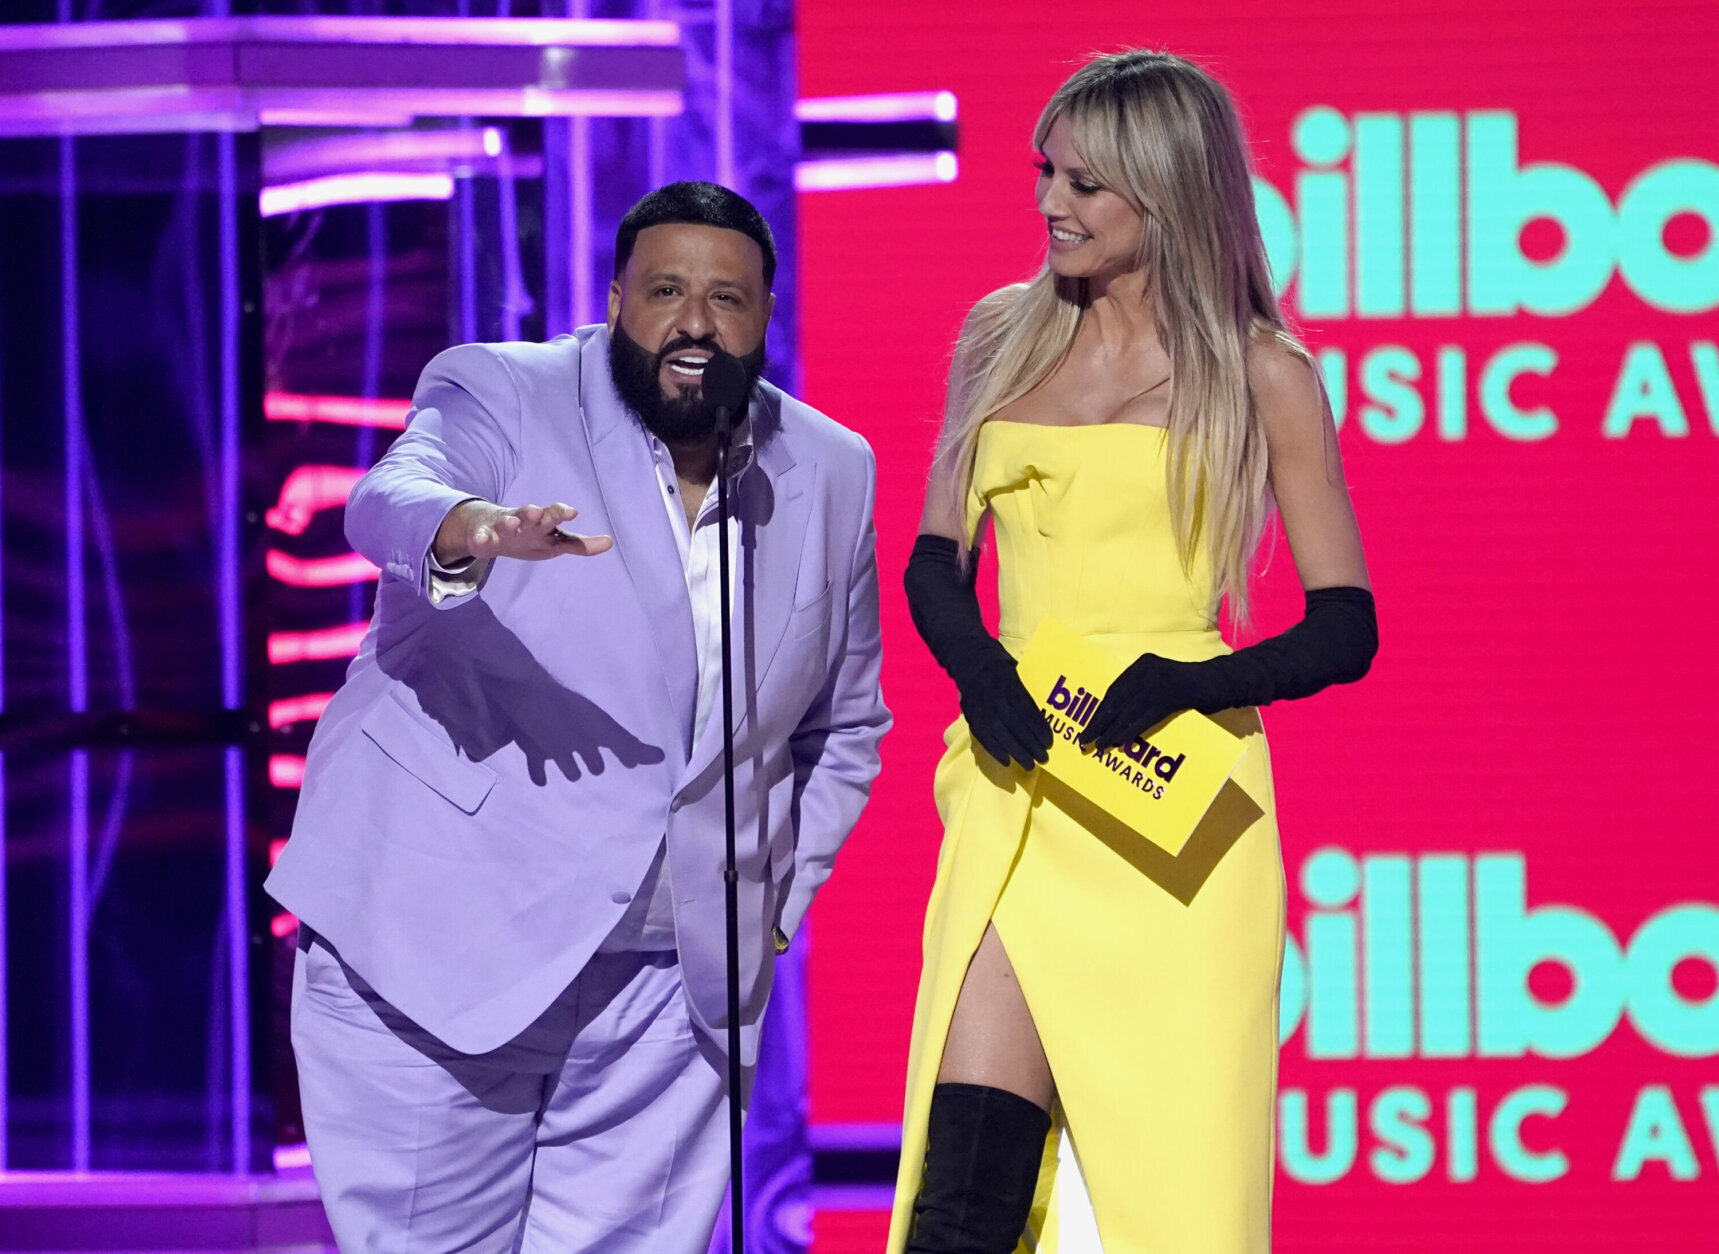 DJ Khaled, left, and Heidi Klum present the award for top rock artist at the Billboard Music Awards on Sunday, May 15, 2022, at the MGM Grand Garden Arena in Las Vegas. (AP Photo/Chris Pizzello)